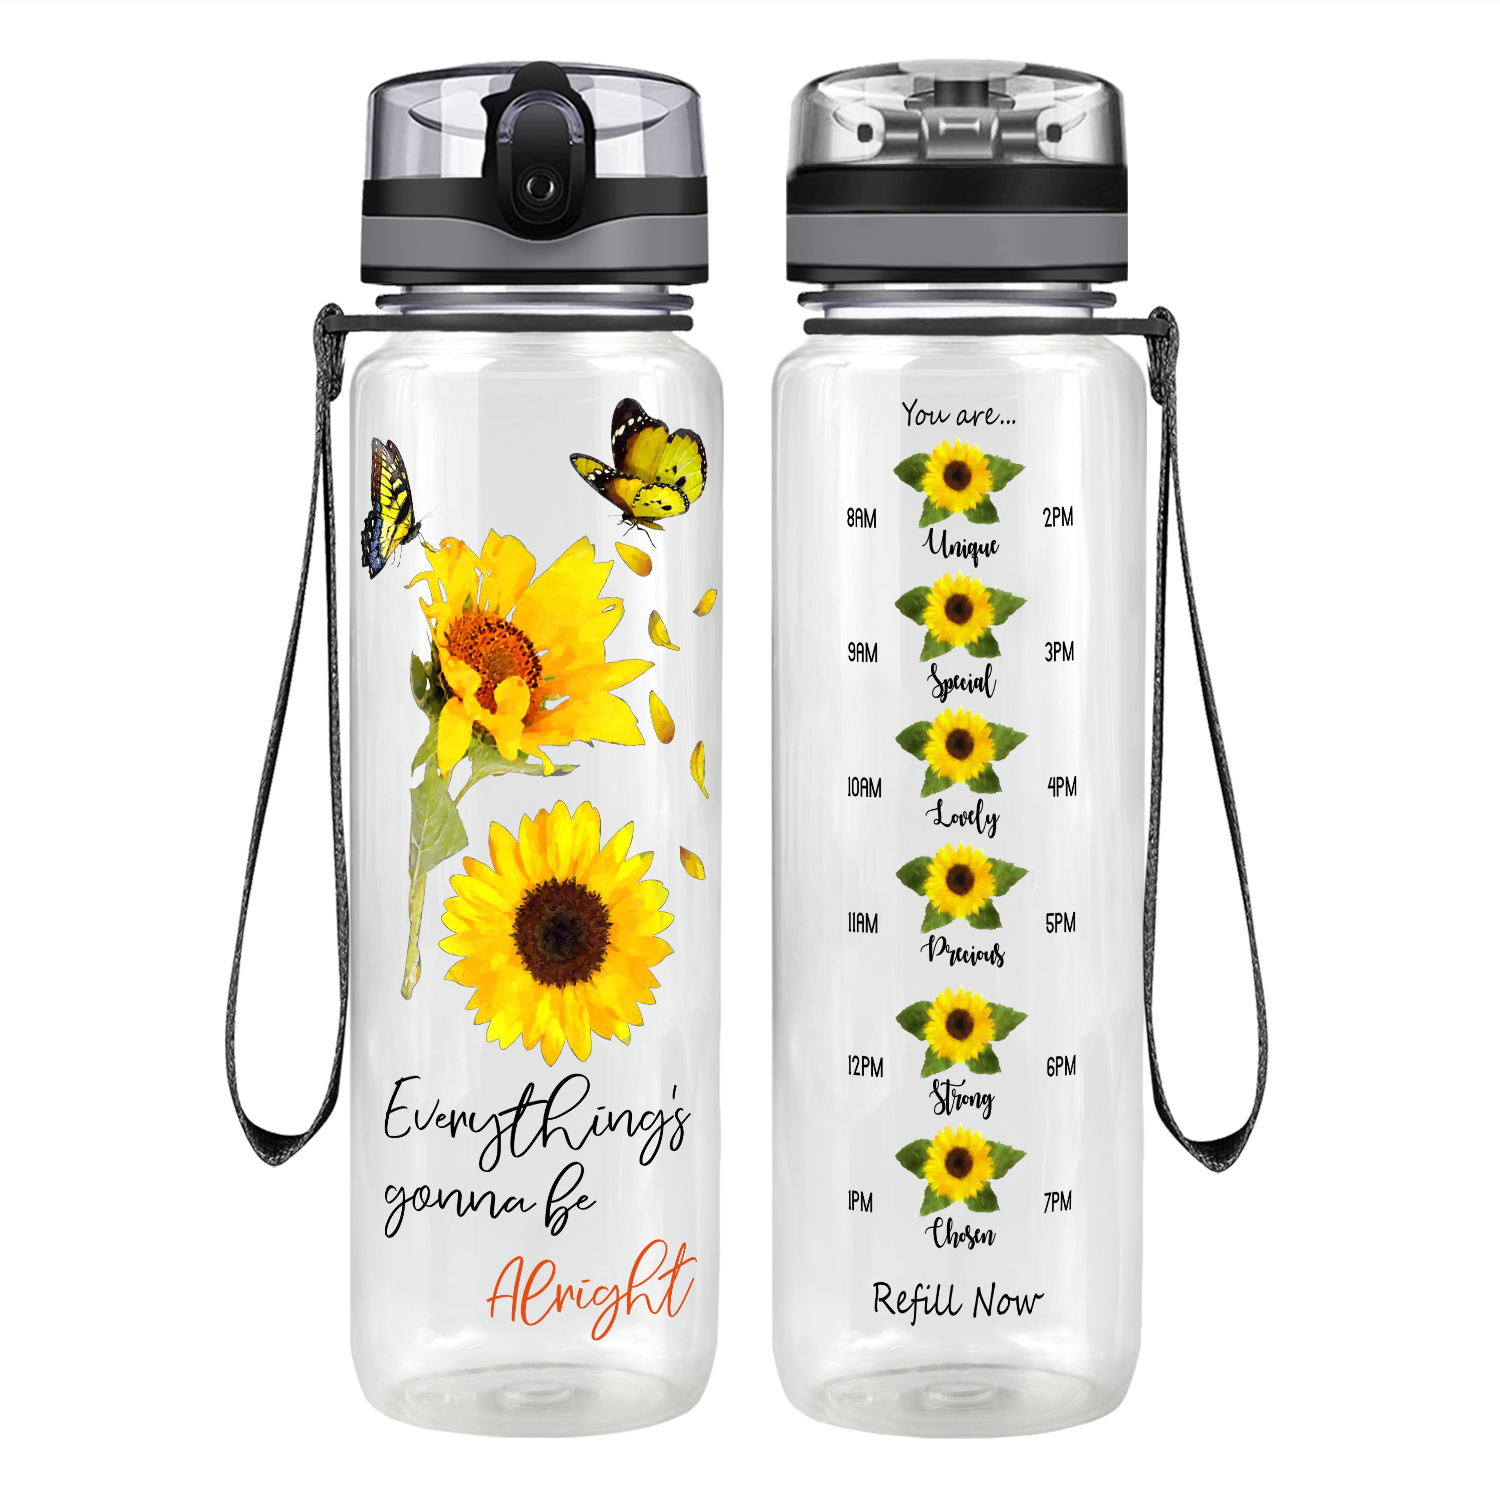 Everything's Gonna Be Alright Sunflower with Butterflies Motivational Tracking Water Bottle